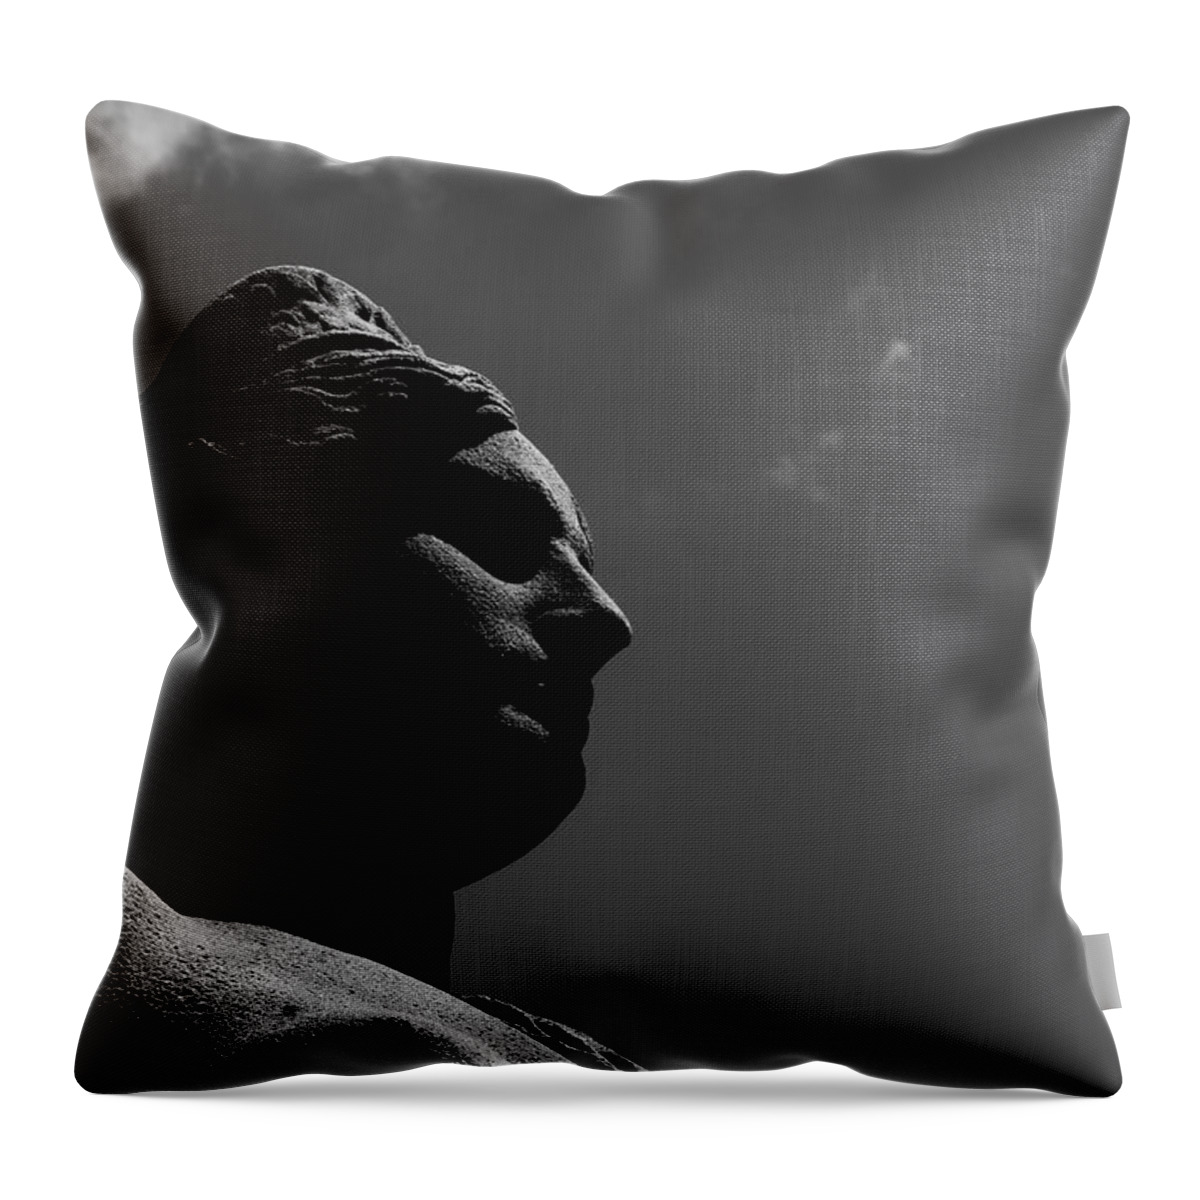 Woman Throw Pillow featuring the photograph Woman 2 by Emme Pons